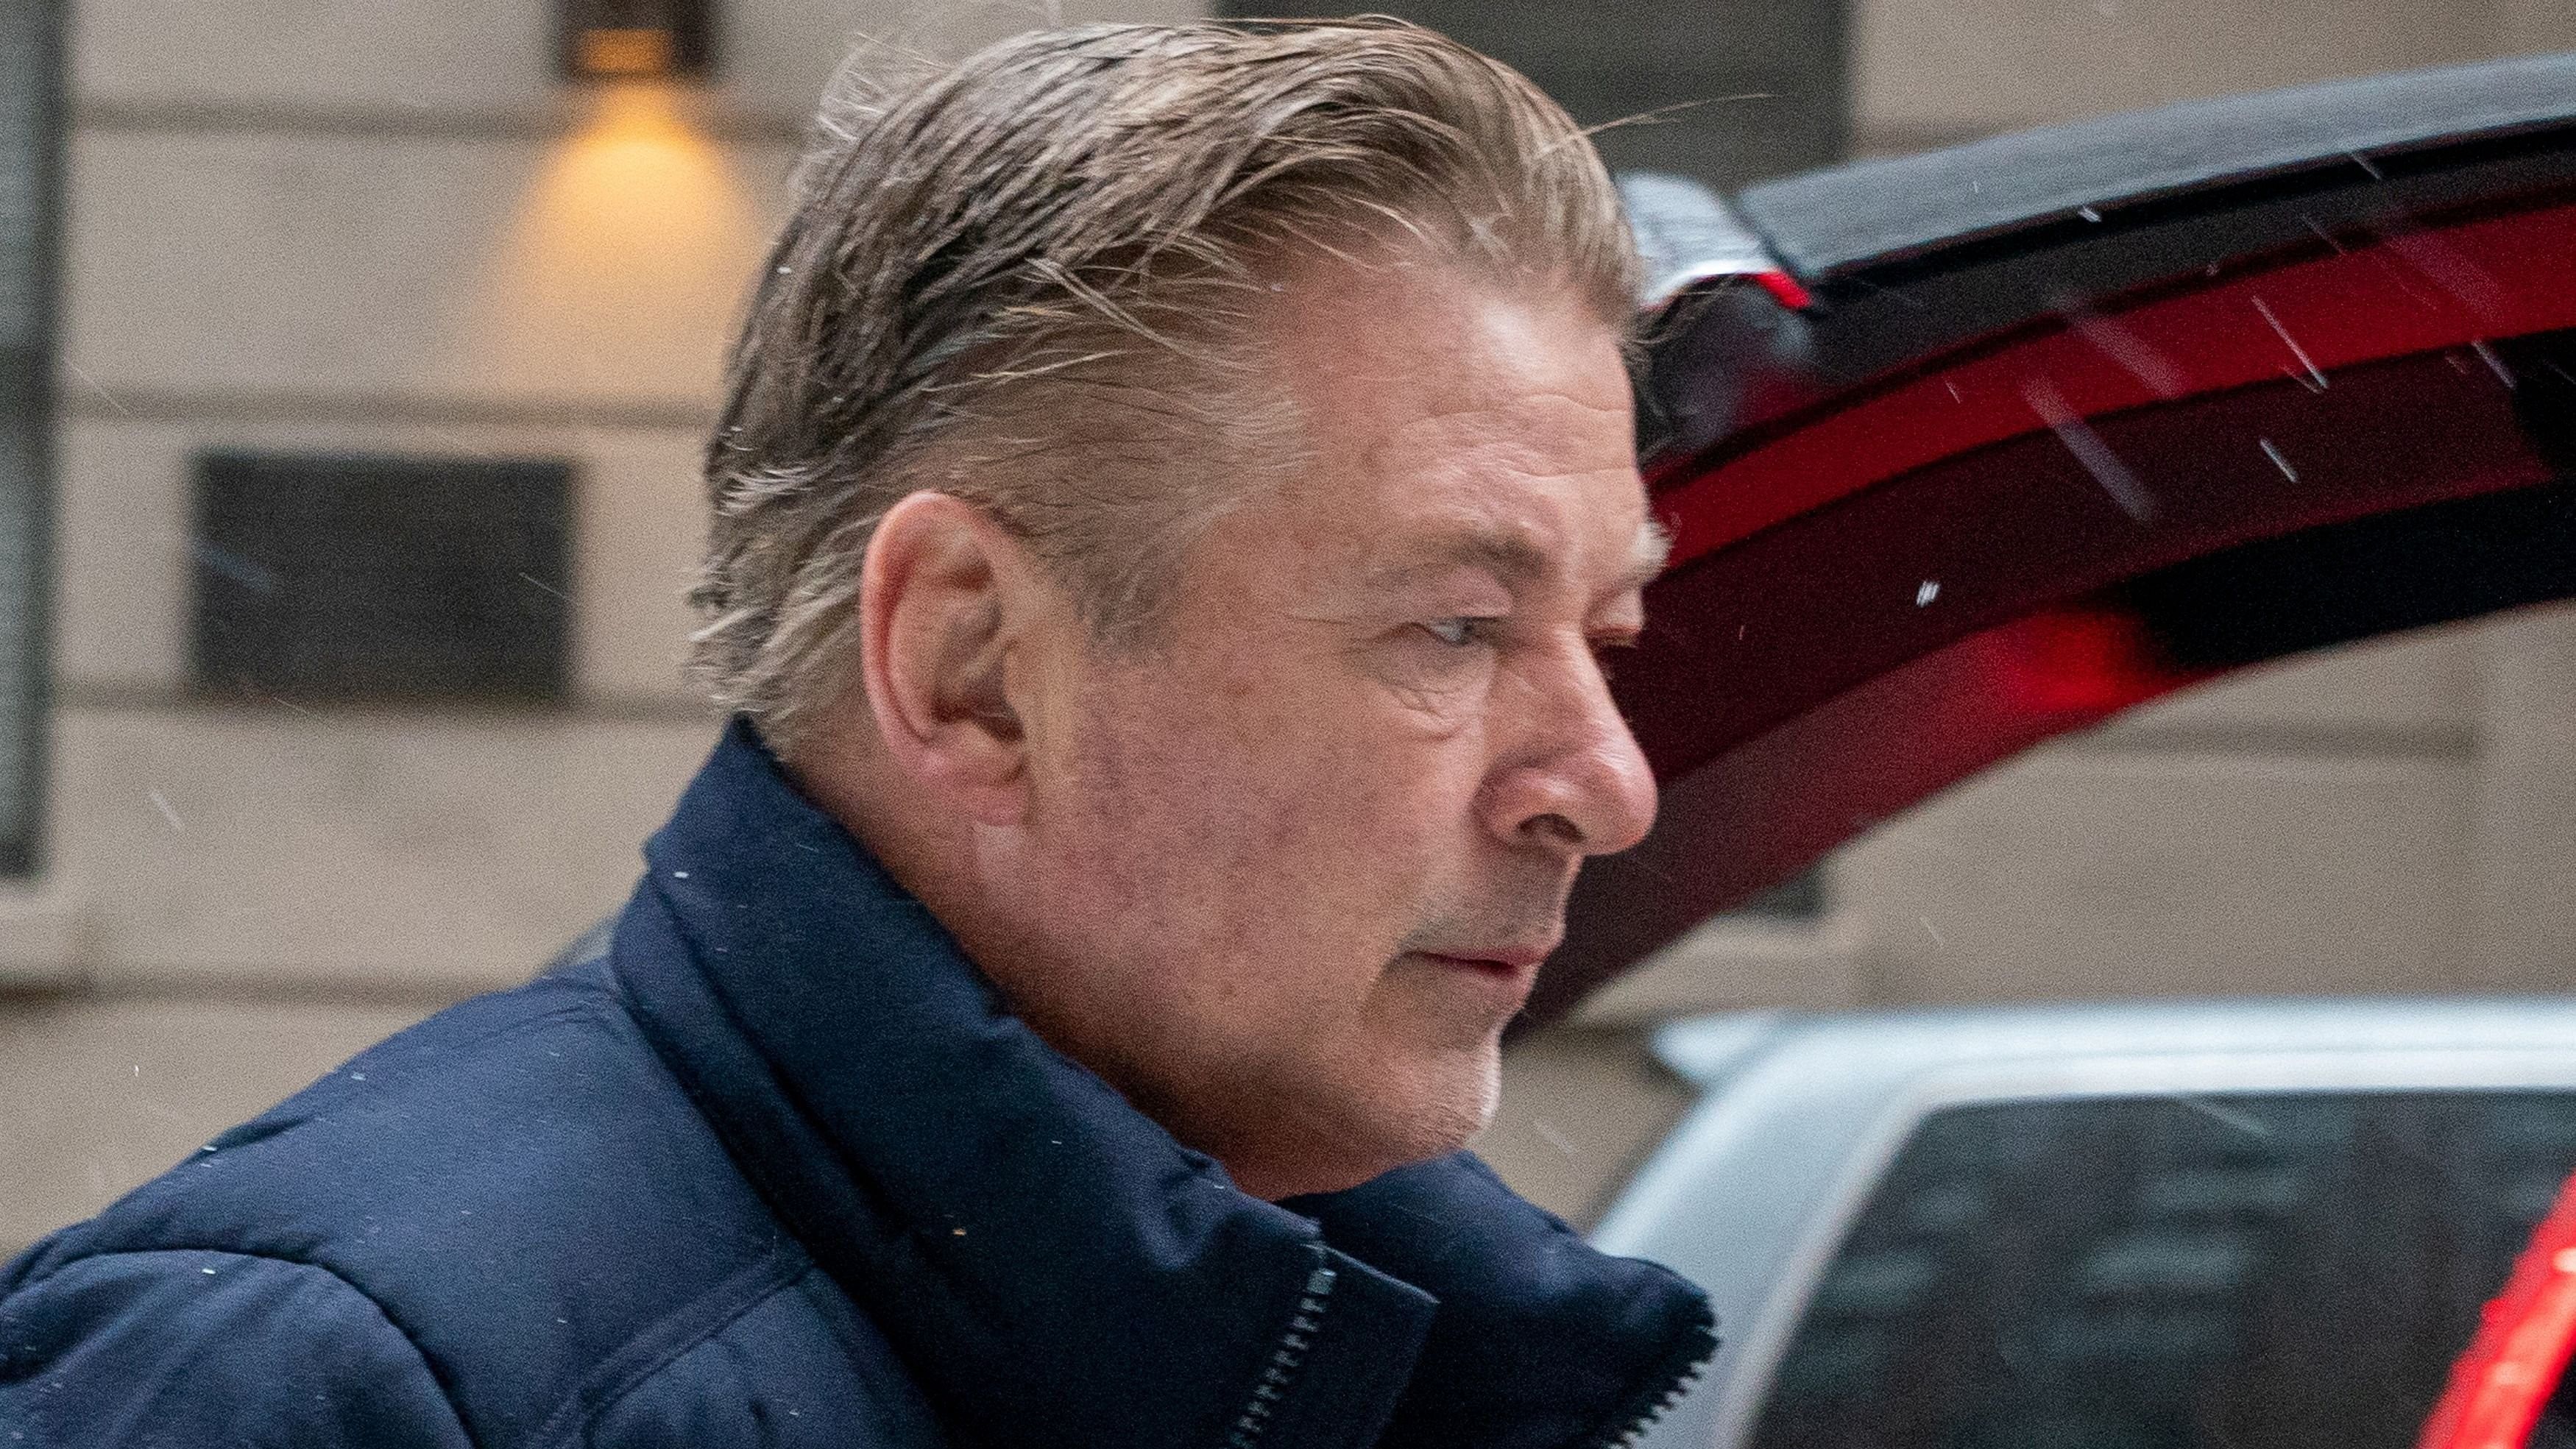 <div class="paragraphs"><p>FILE PHOTO: Actor Alec Baldwin departs his home, as he will be charged with involuntary manslaughter for the fatal shooting of cinematographer Halyna Hutchins on the set of the movie "Rust",  in New York, U.S., January 31, 2023. </p></div>